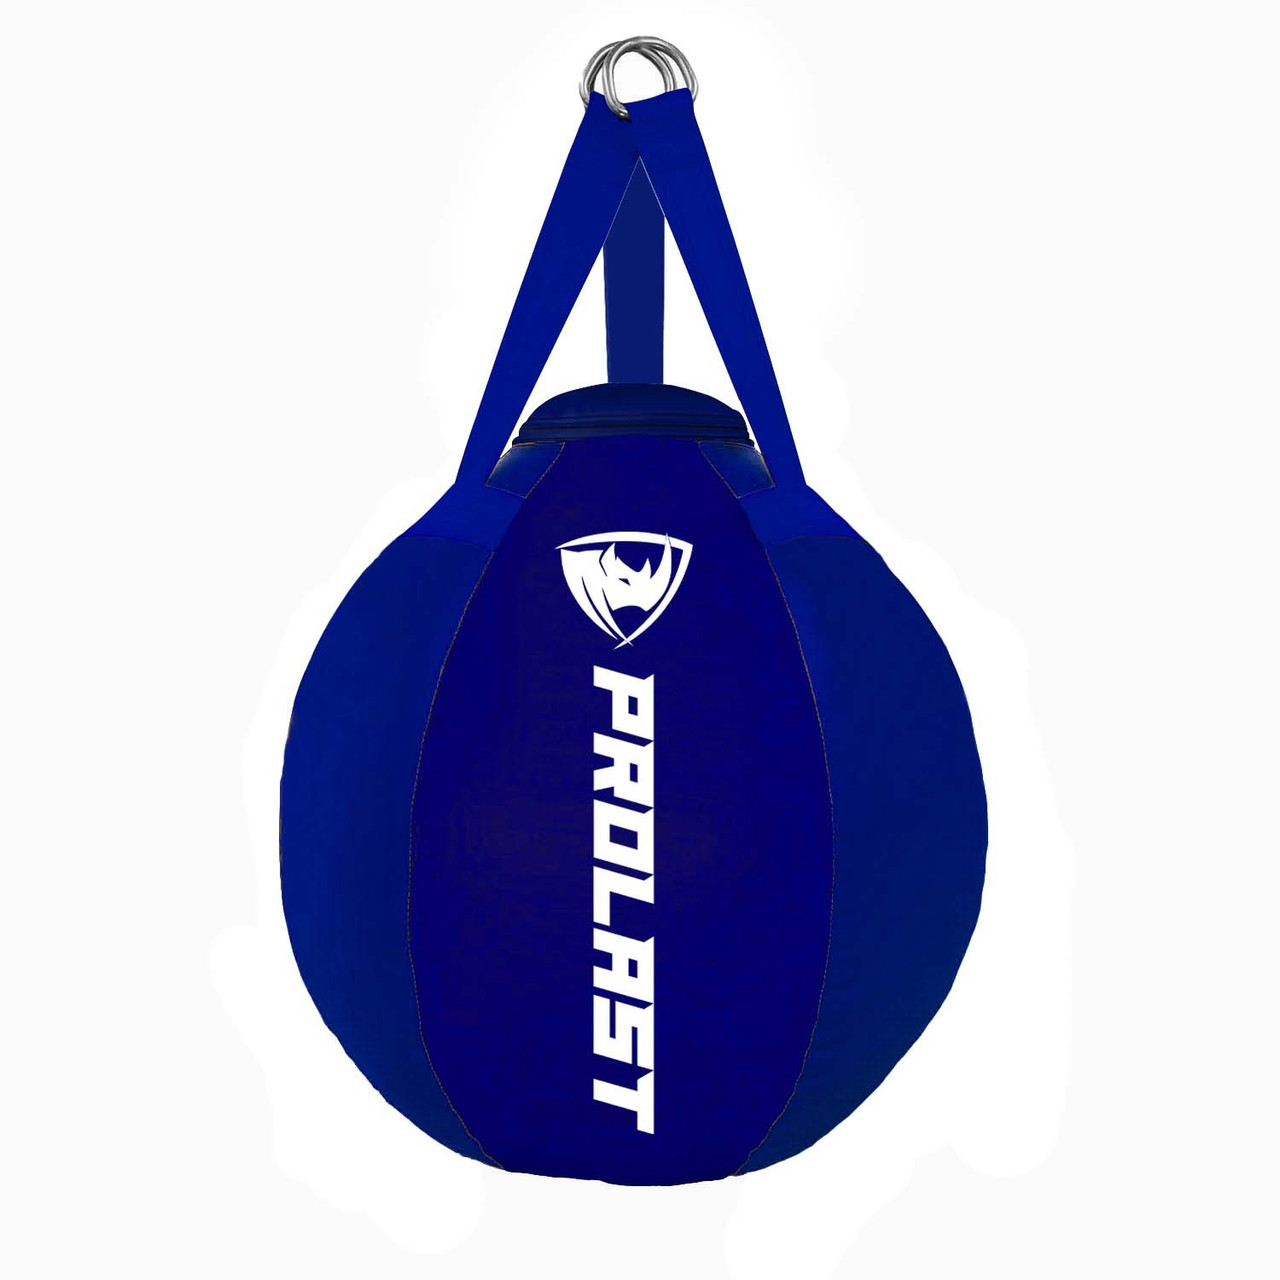 70lb Wrecking Ball Round Heavy Bag Navy Blue Made in USA